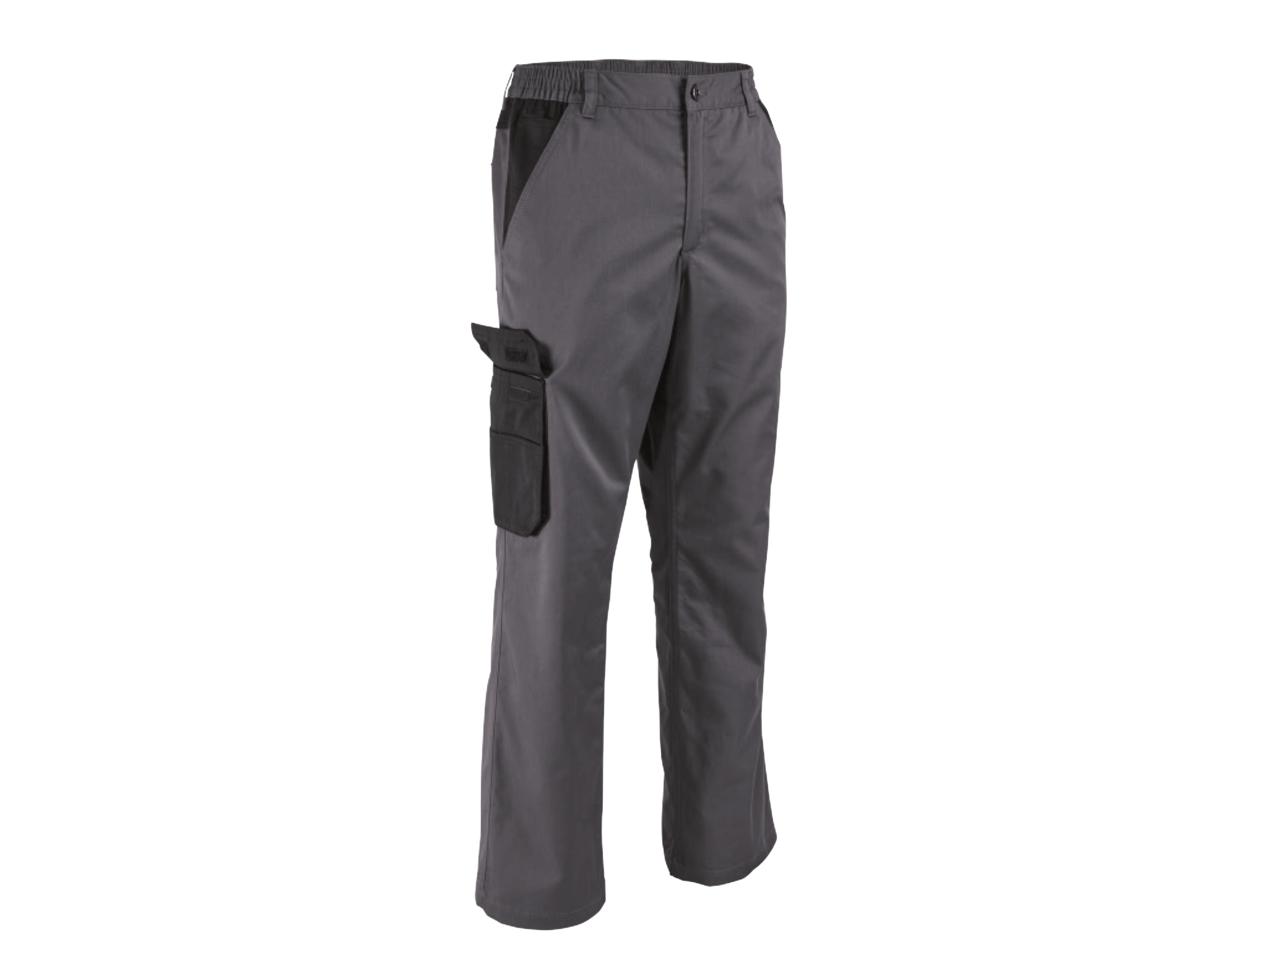 POWERFIX Mens Thermal Work Trousers - Lidl — Ireland - Specials archive